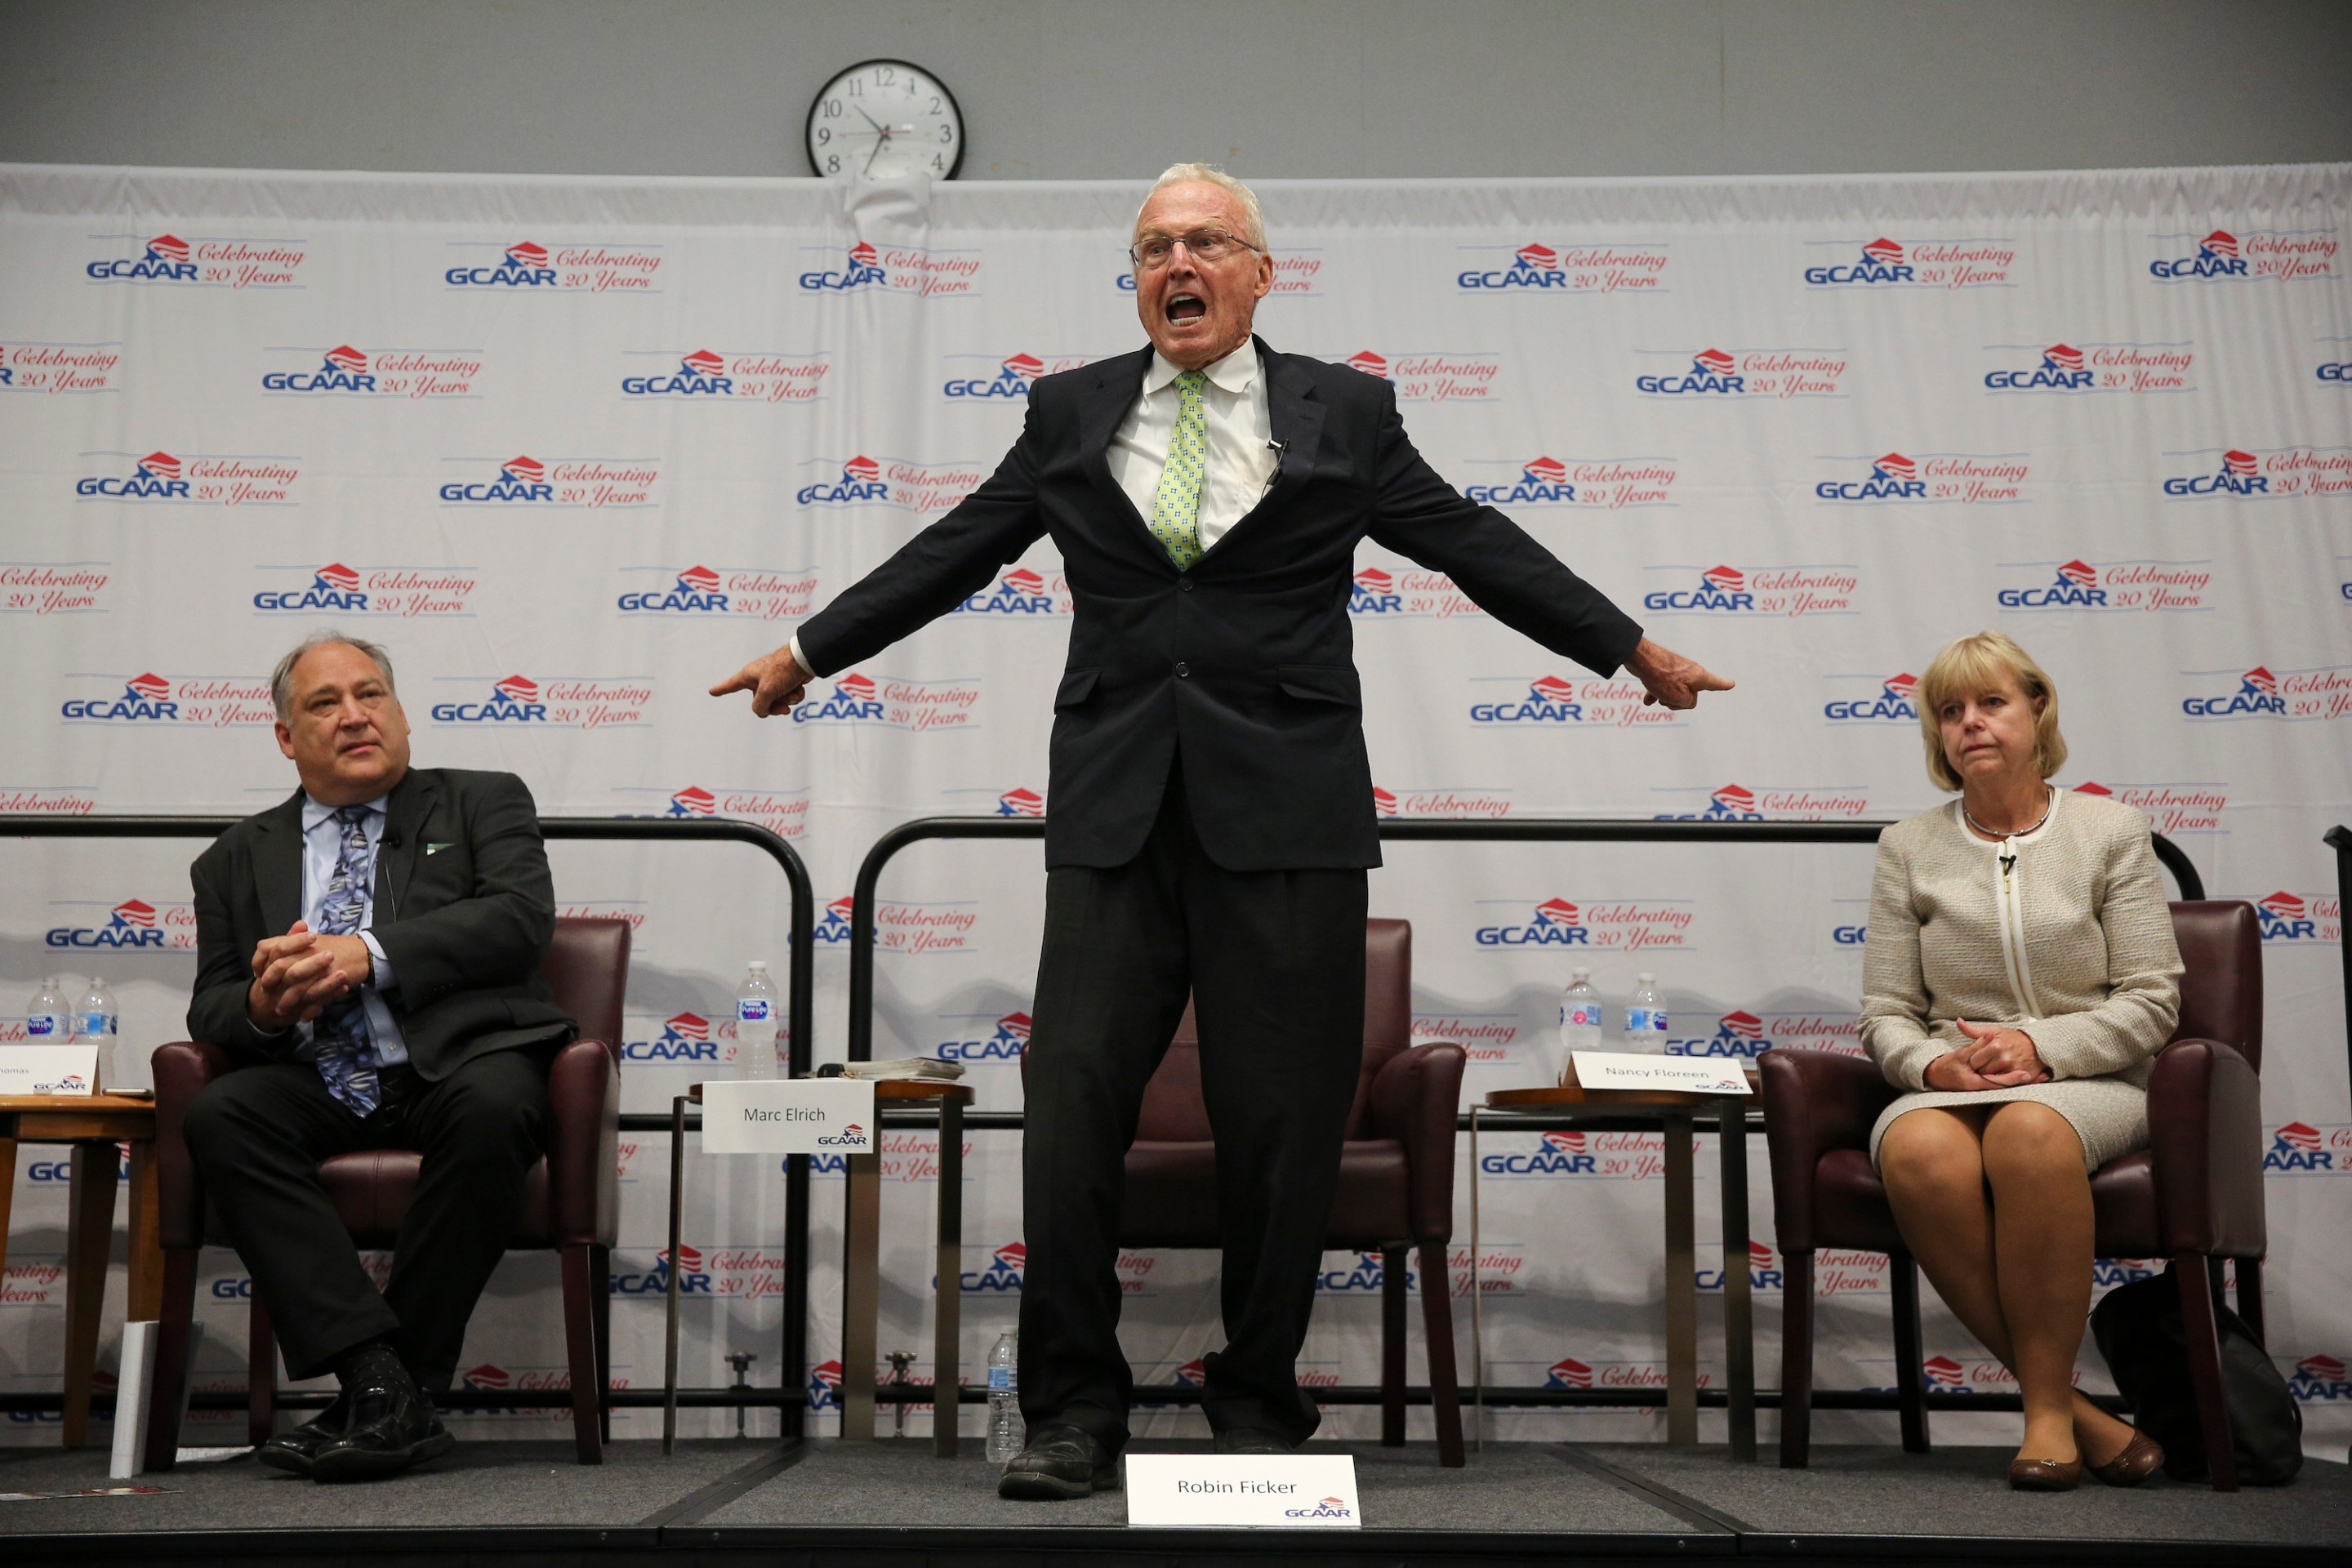 SHADY GROVE, MD - SEPTEMBER 26: Robin Ficker, a Republican candidate for Montgomery County Executive, speaks during a County Executive Candidates debate on September 26, 2018 in Shady Grove, MD. (Photo by Oliver Contreras/For The Washington Post via Getty Images)